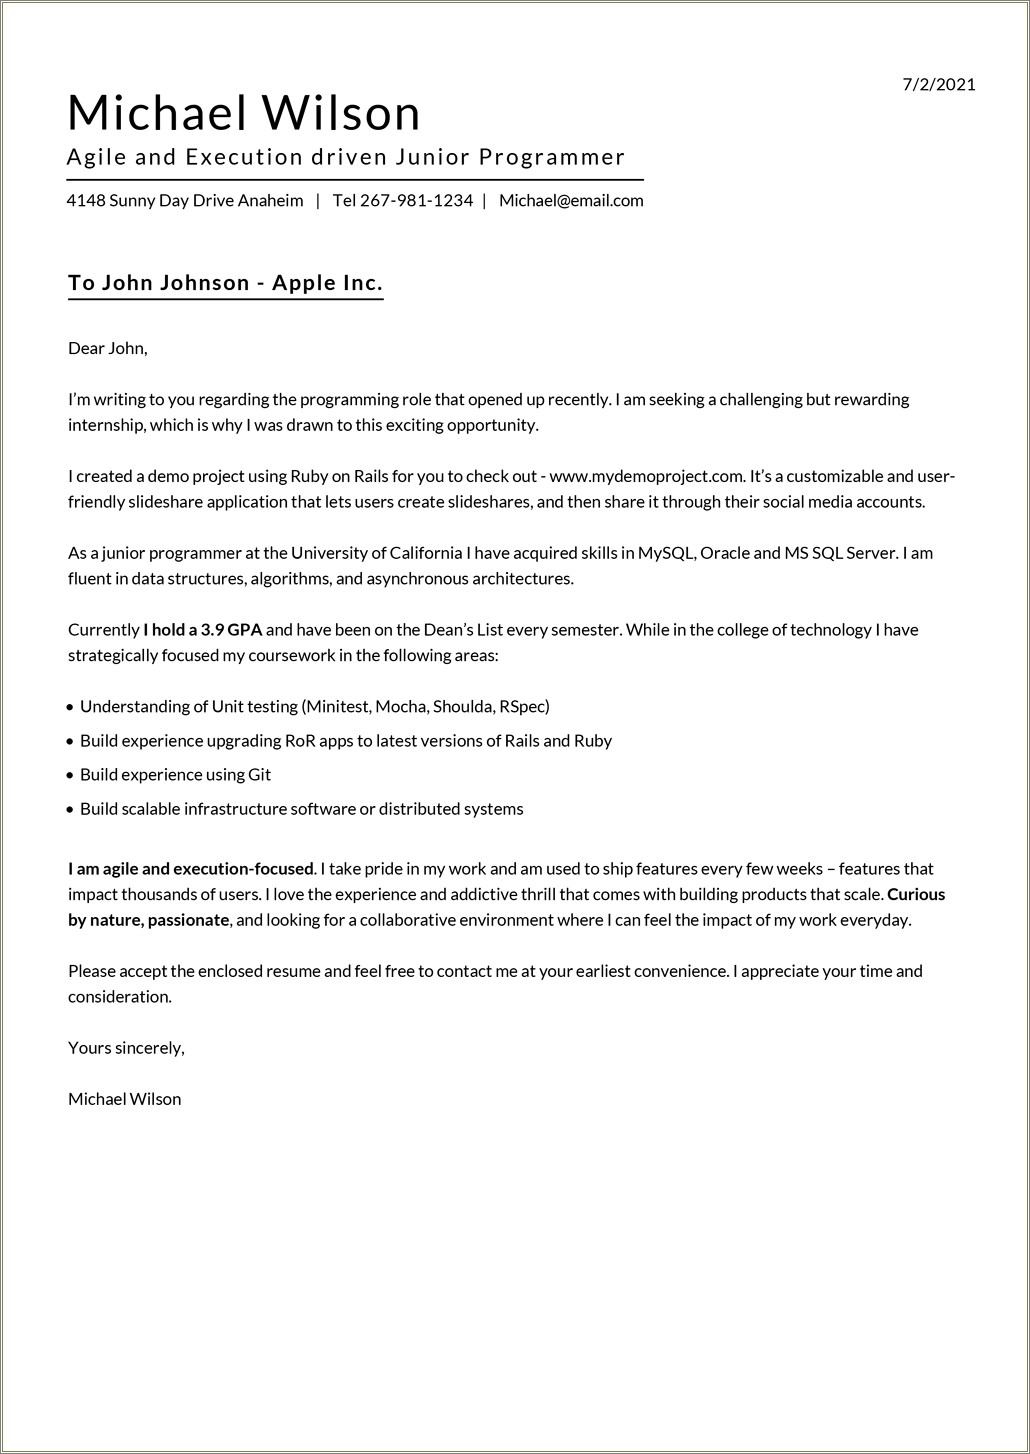 Resume Cover Letter For Students With No Experience